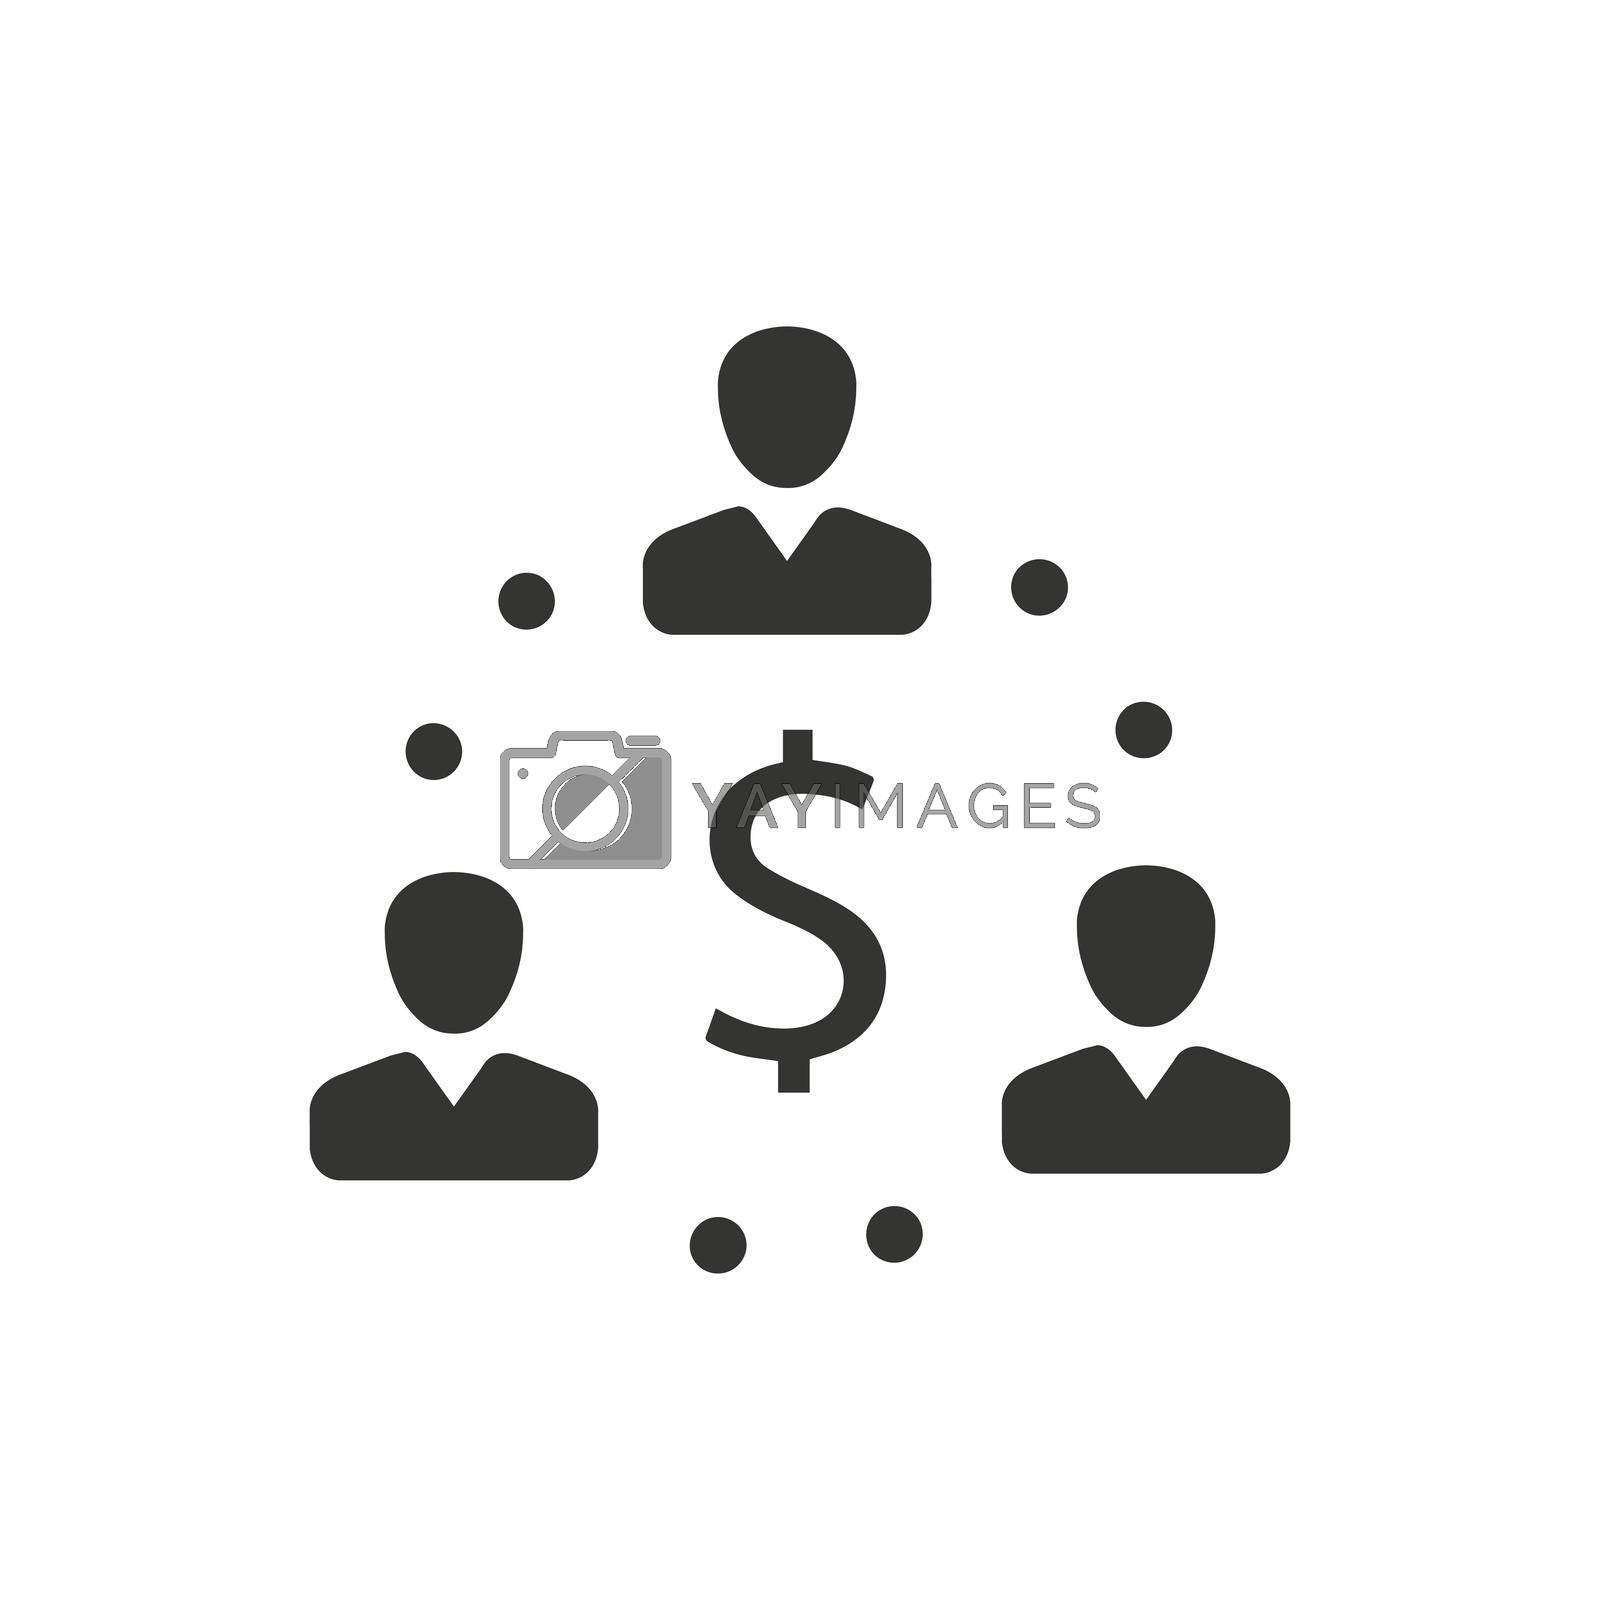 Business Communication icon. Vector EPS file.